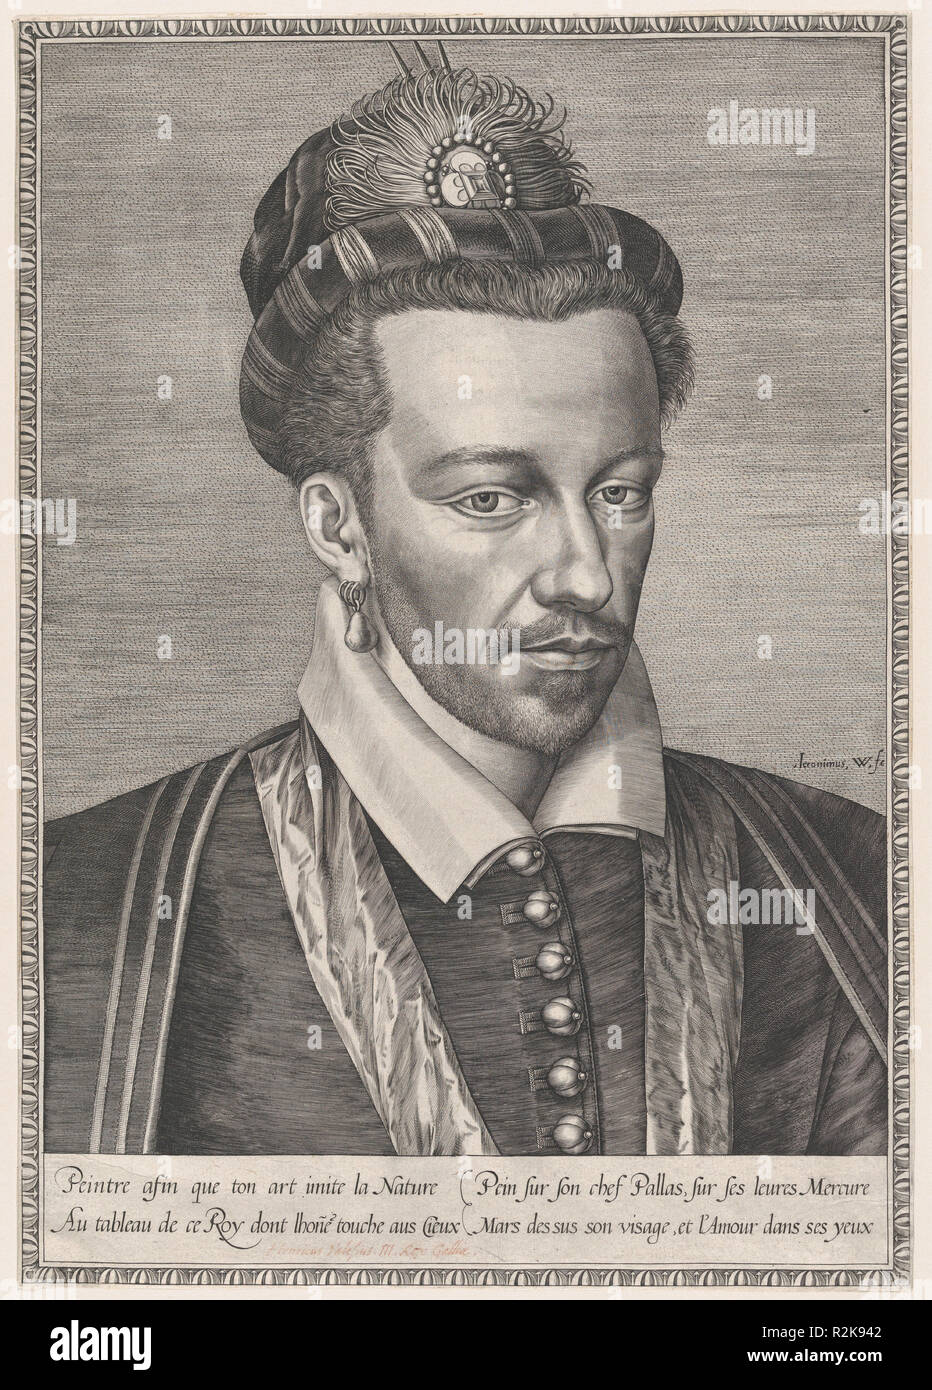 Henri III, King of France. Artist: Hieronymus (Jerome) Wierix (Netherlandish, ca. 1553-1619 Antwerp). Dimensions: Height: 14 in. (35.5 cm)  Width: 9 11/16 in. (24.6 cm). Date: ca. 1582-6.  When Henri appeared in public after he arrived in Venice in July 1574, the magnificence of his dress was a subject of great interest. Although this print was made about a decade after his visit, the verse along the bottom alludes to the king's virtues and handsome bearing. Henri was equally famous for his elegant dress and for his relationships with both sexes. The fastidious rendering of his features here c Stock Photo